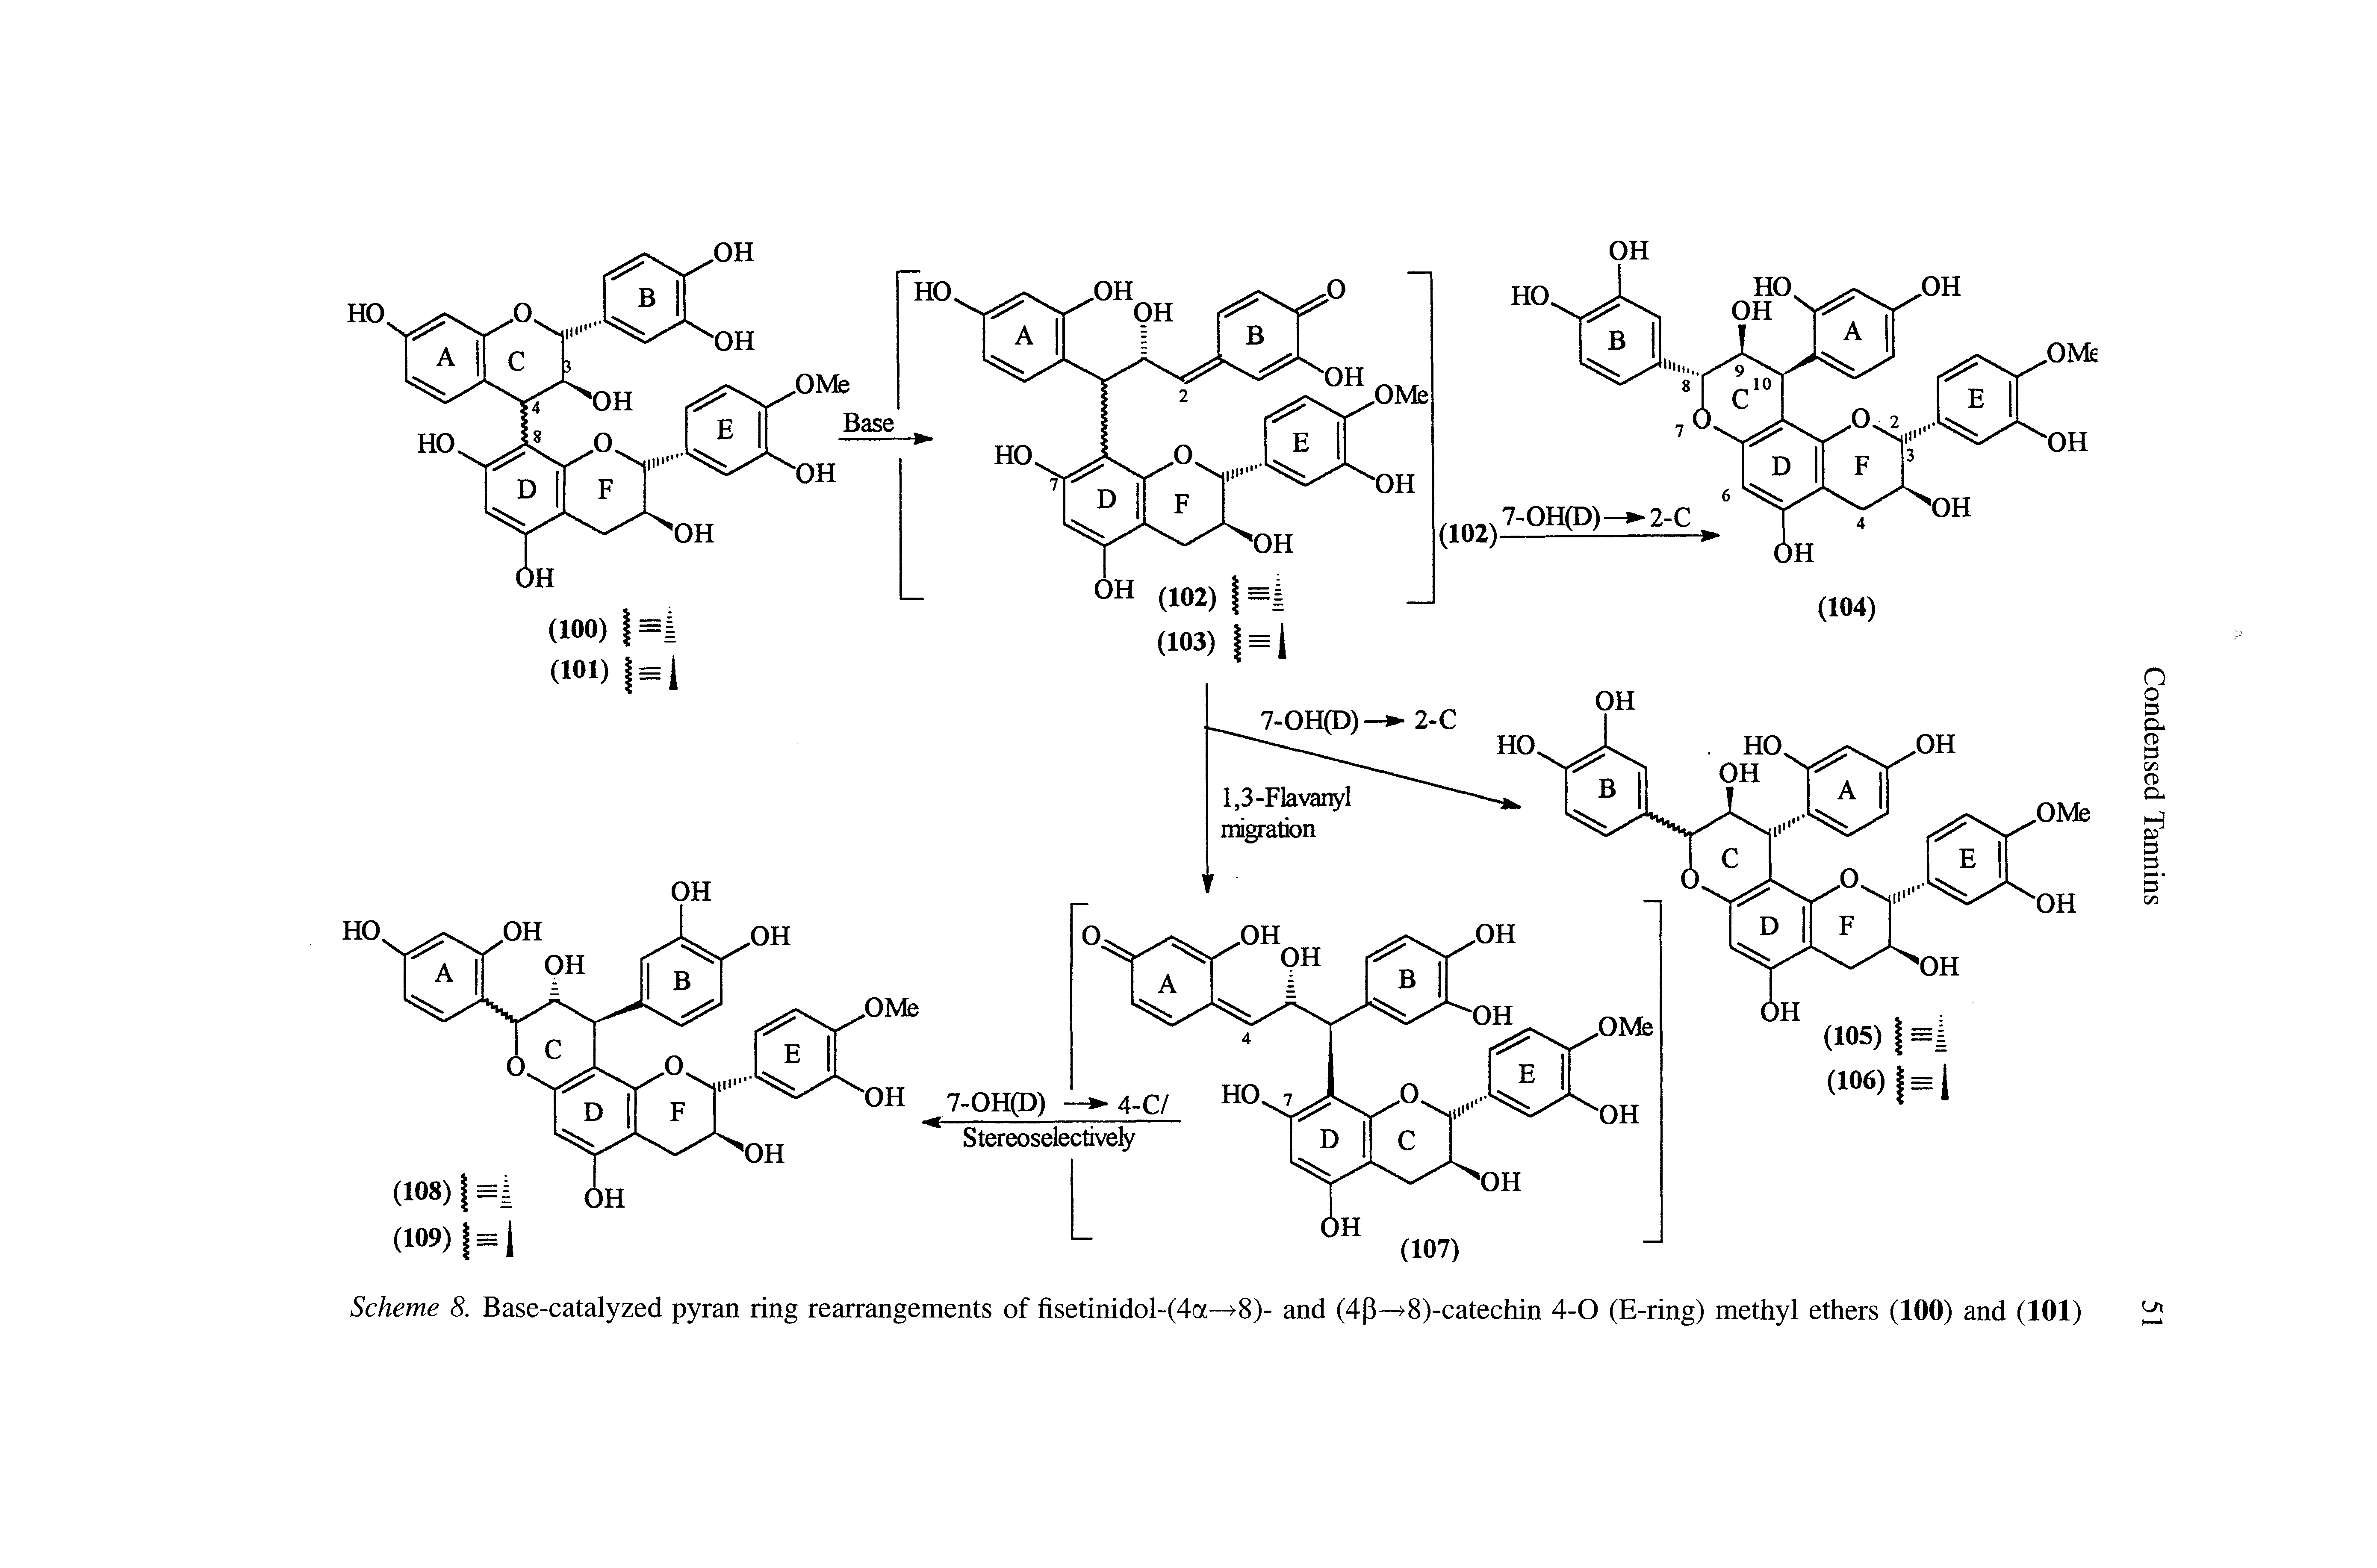 Scheme 8. Base-catalyzed pyran ring rearrangements of fisetinidol-(4a—>8)- and (4p— 8)-catechin 4-0 (E-ring) methyl ethers (100) and (101) ] 1...